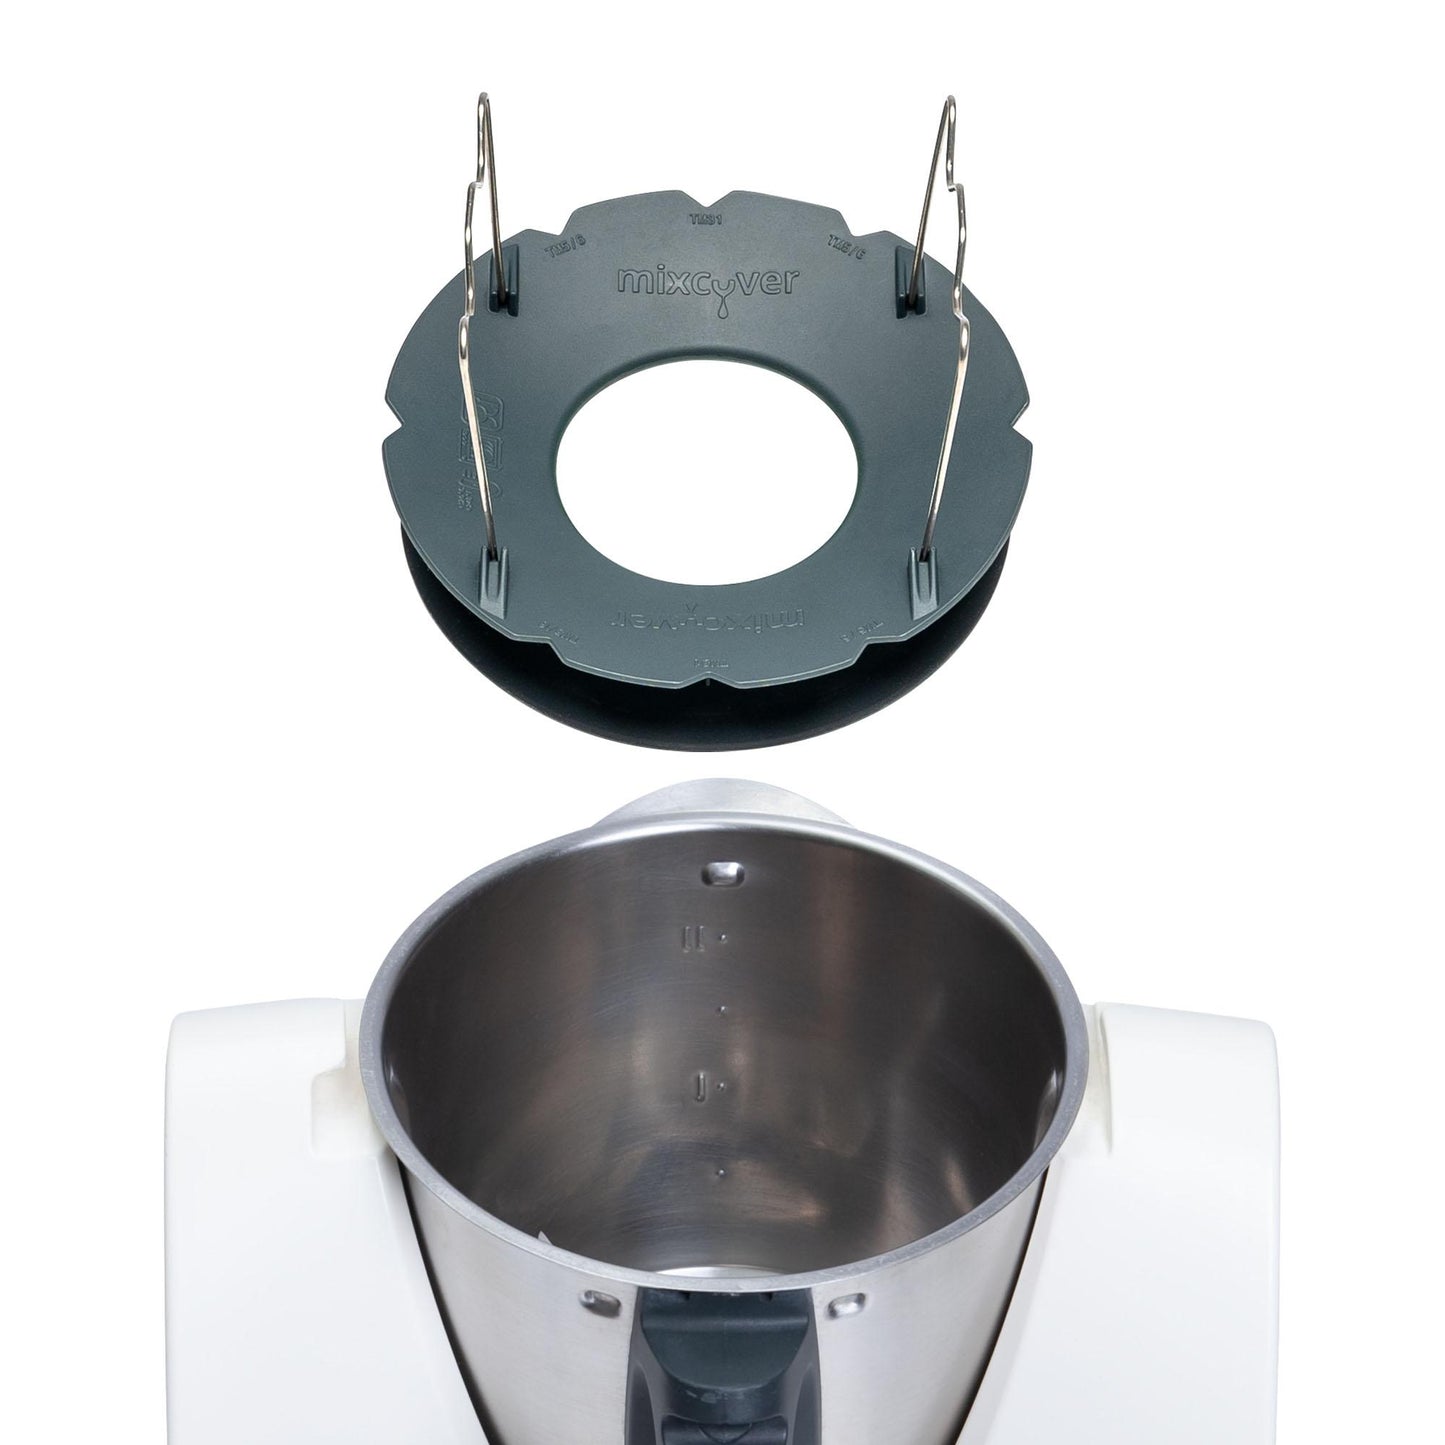 B-stock: mixcover Mixtop pot reduction for Thermomix TM31 chopper helpers, puree